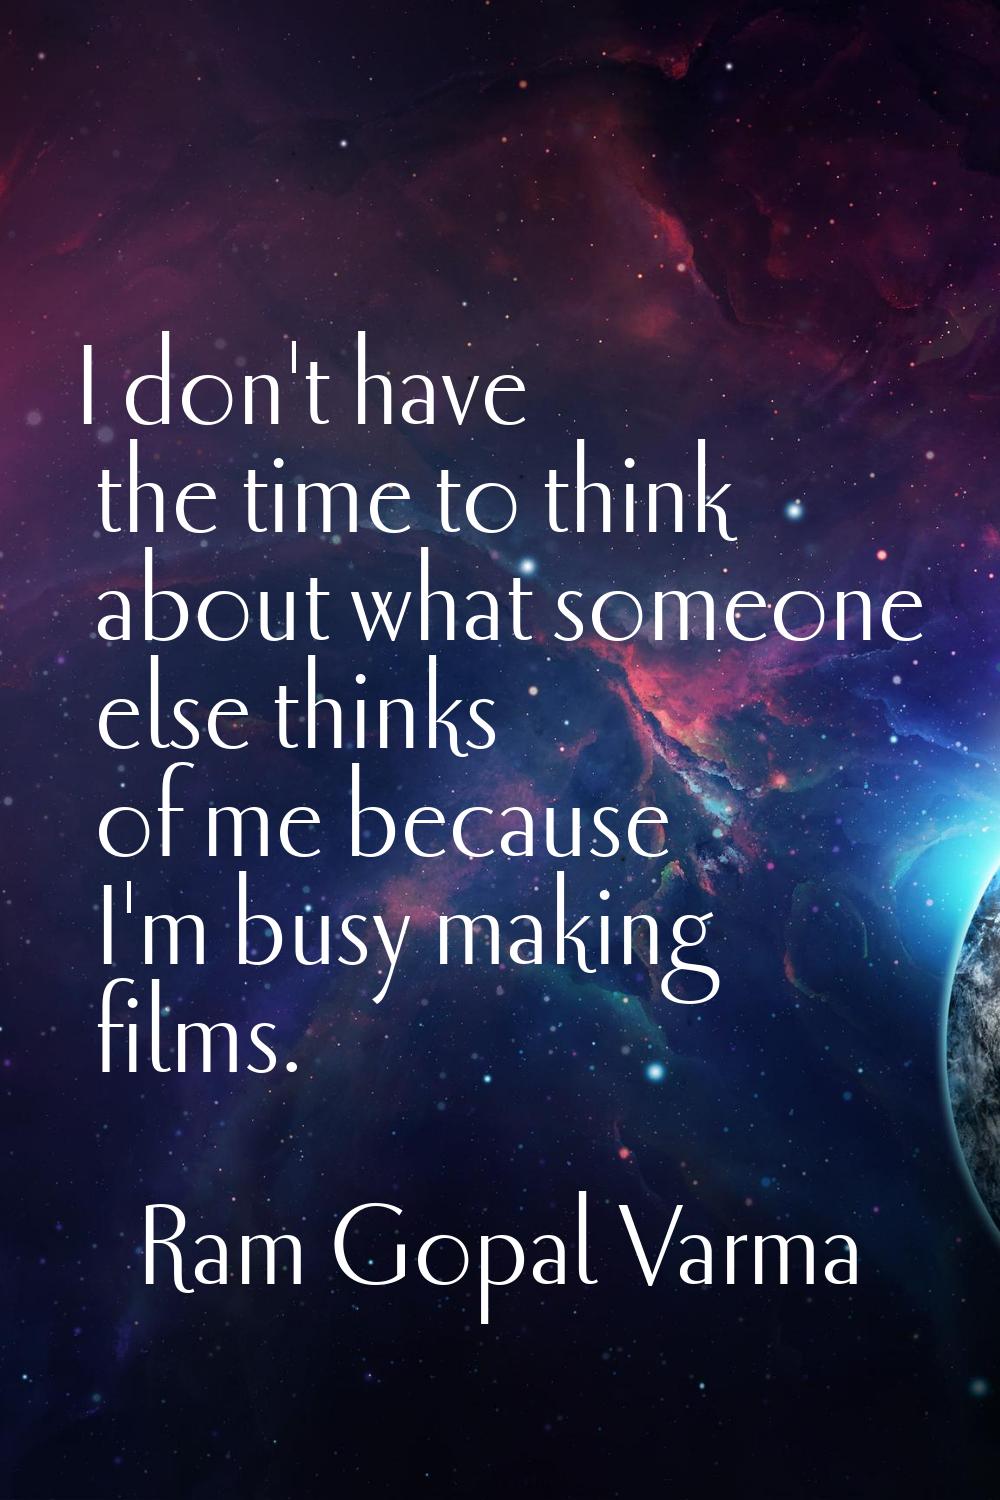 I don't have the time to think about what someone else thinks of me because I'm busy making films.